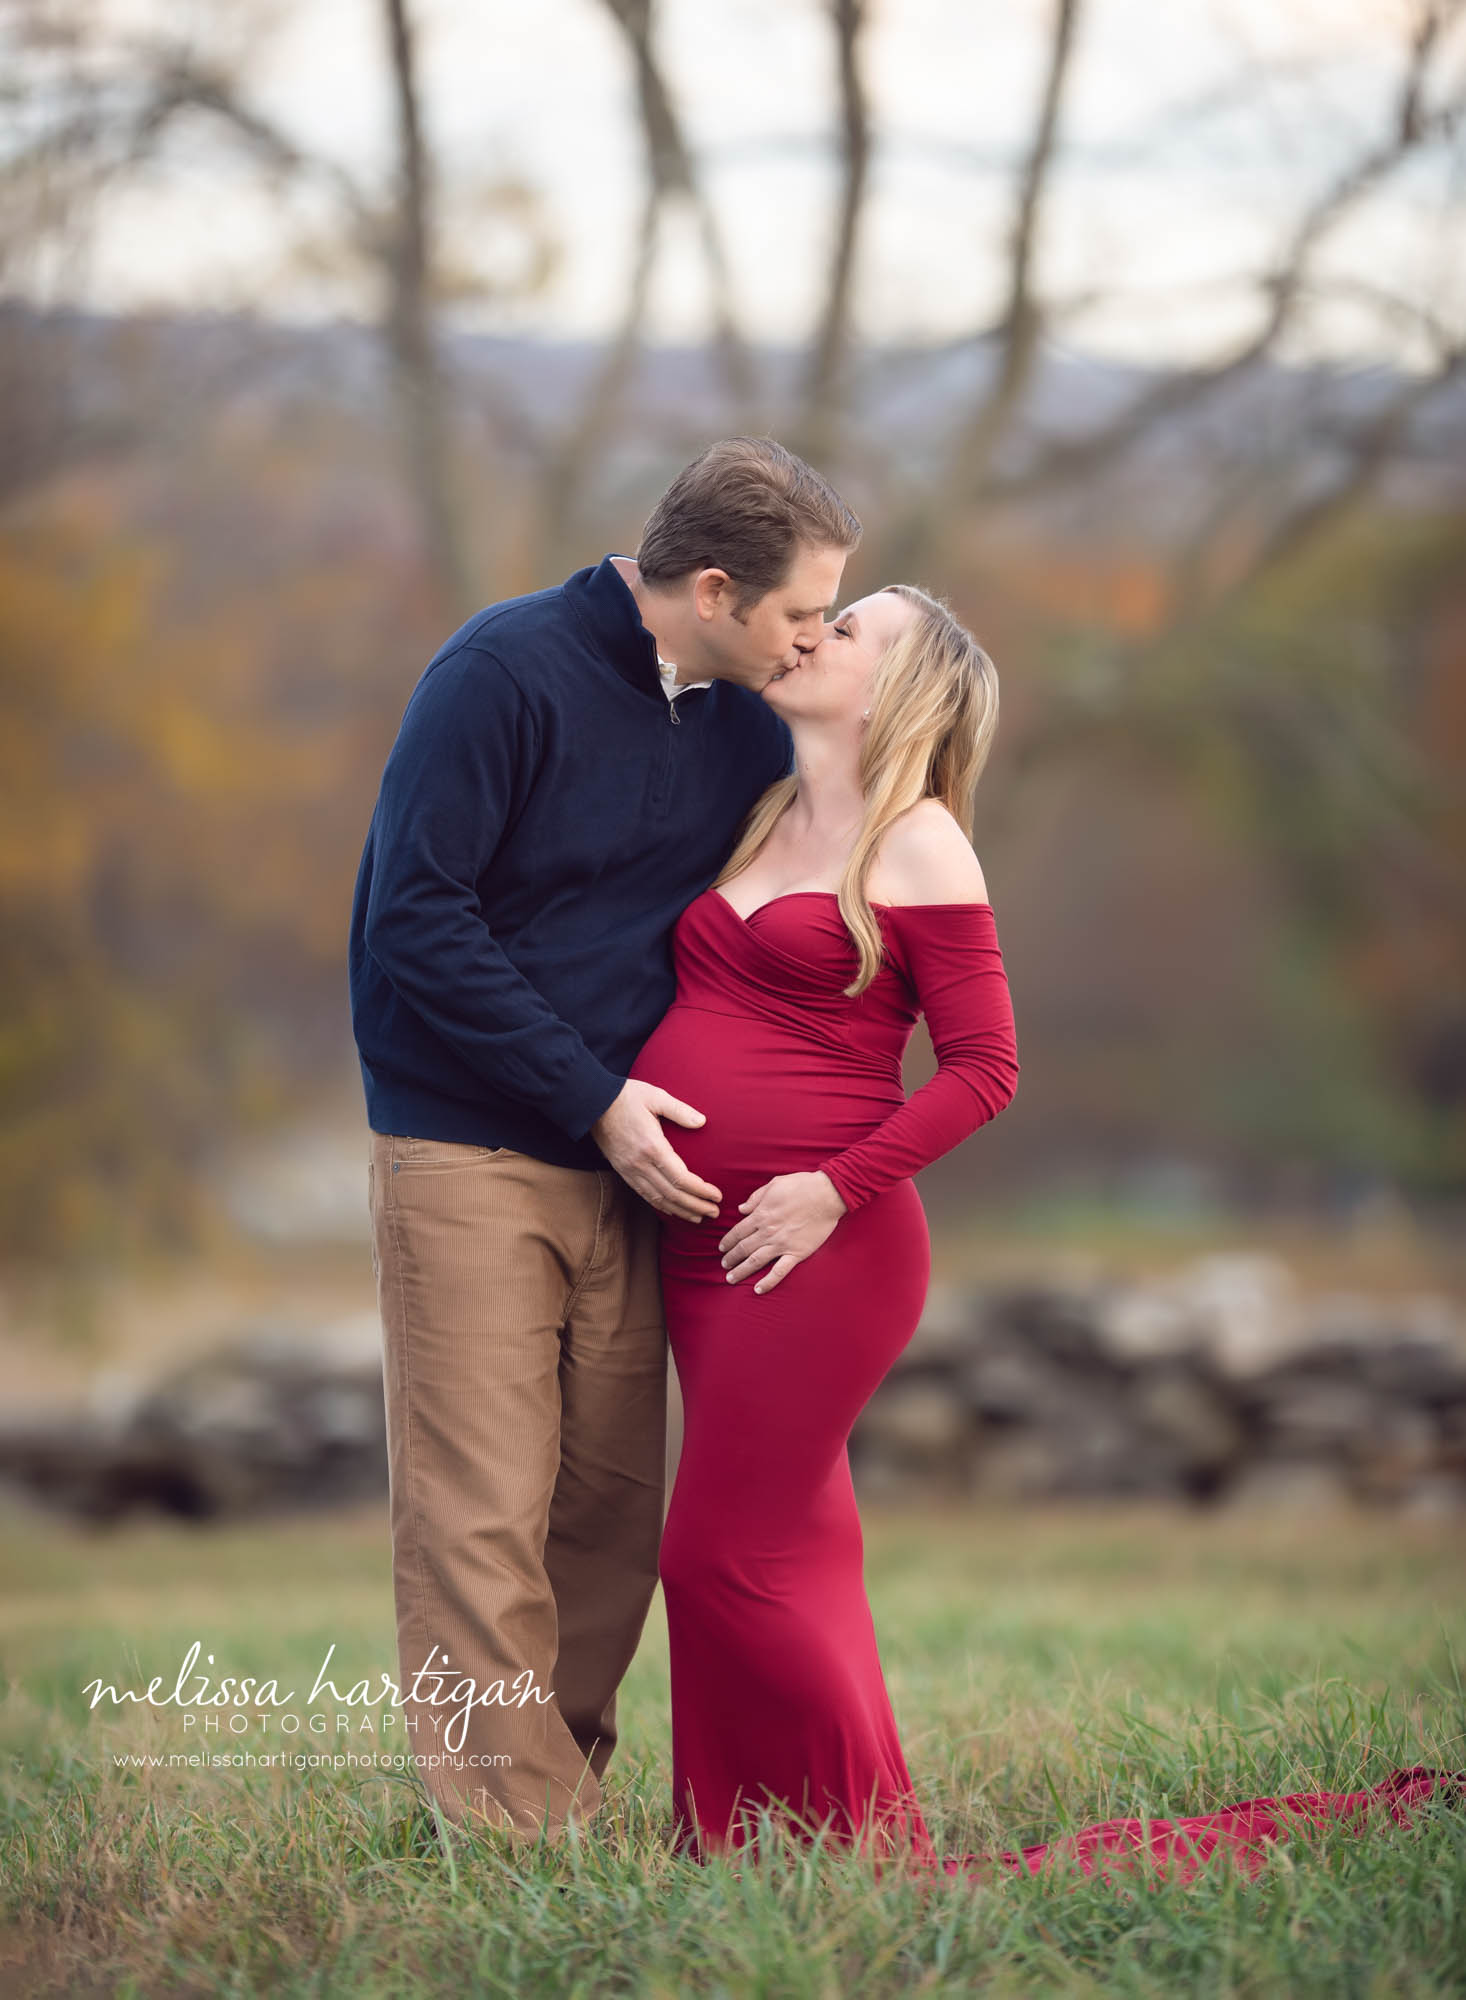 Expectant couple sharing a kiss dad holding baby bump best maternity newborn photorgapher CT